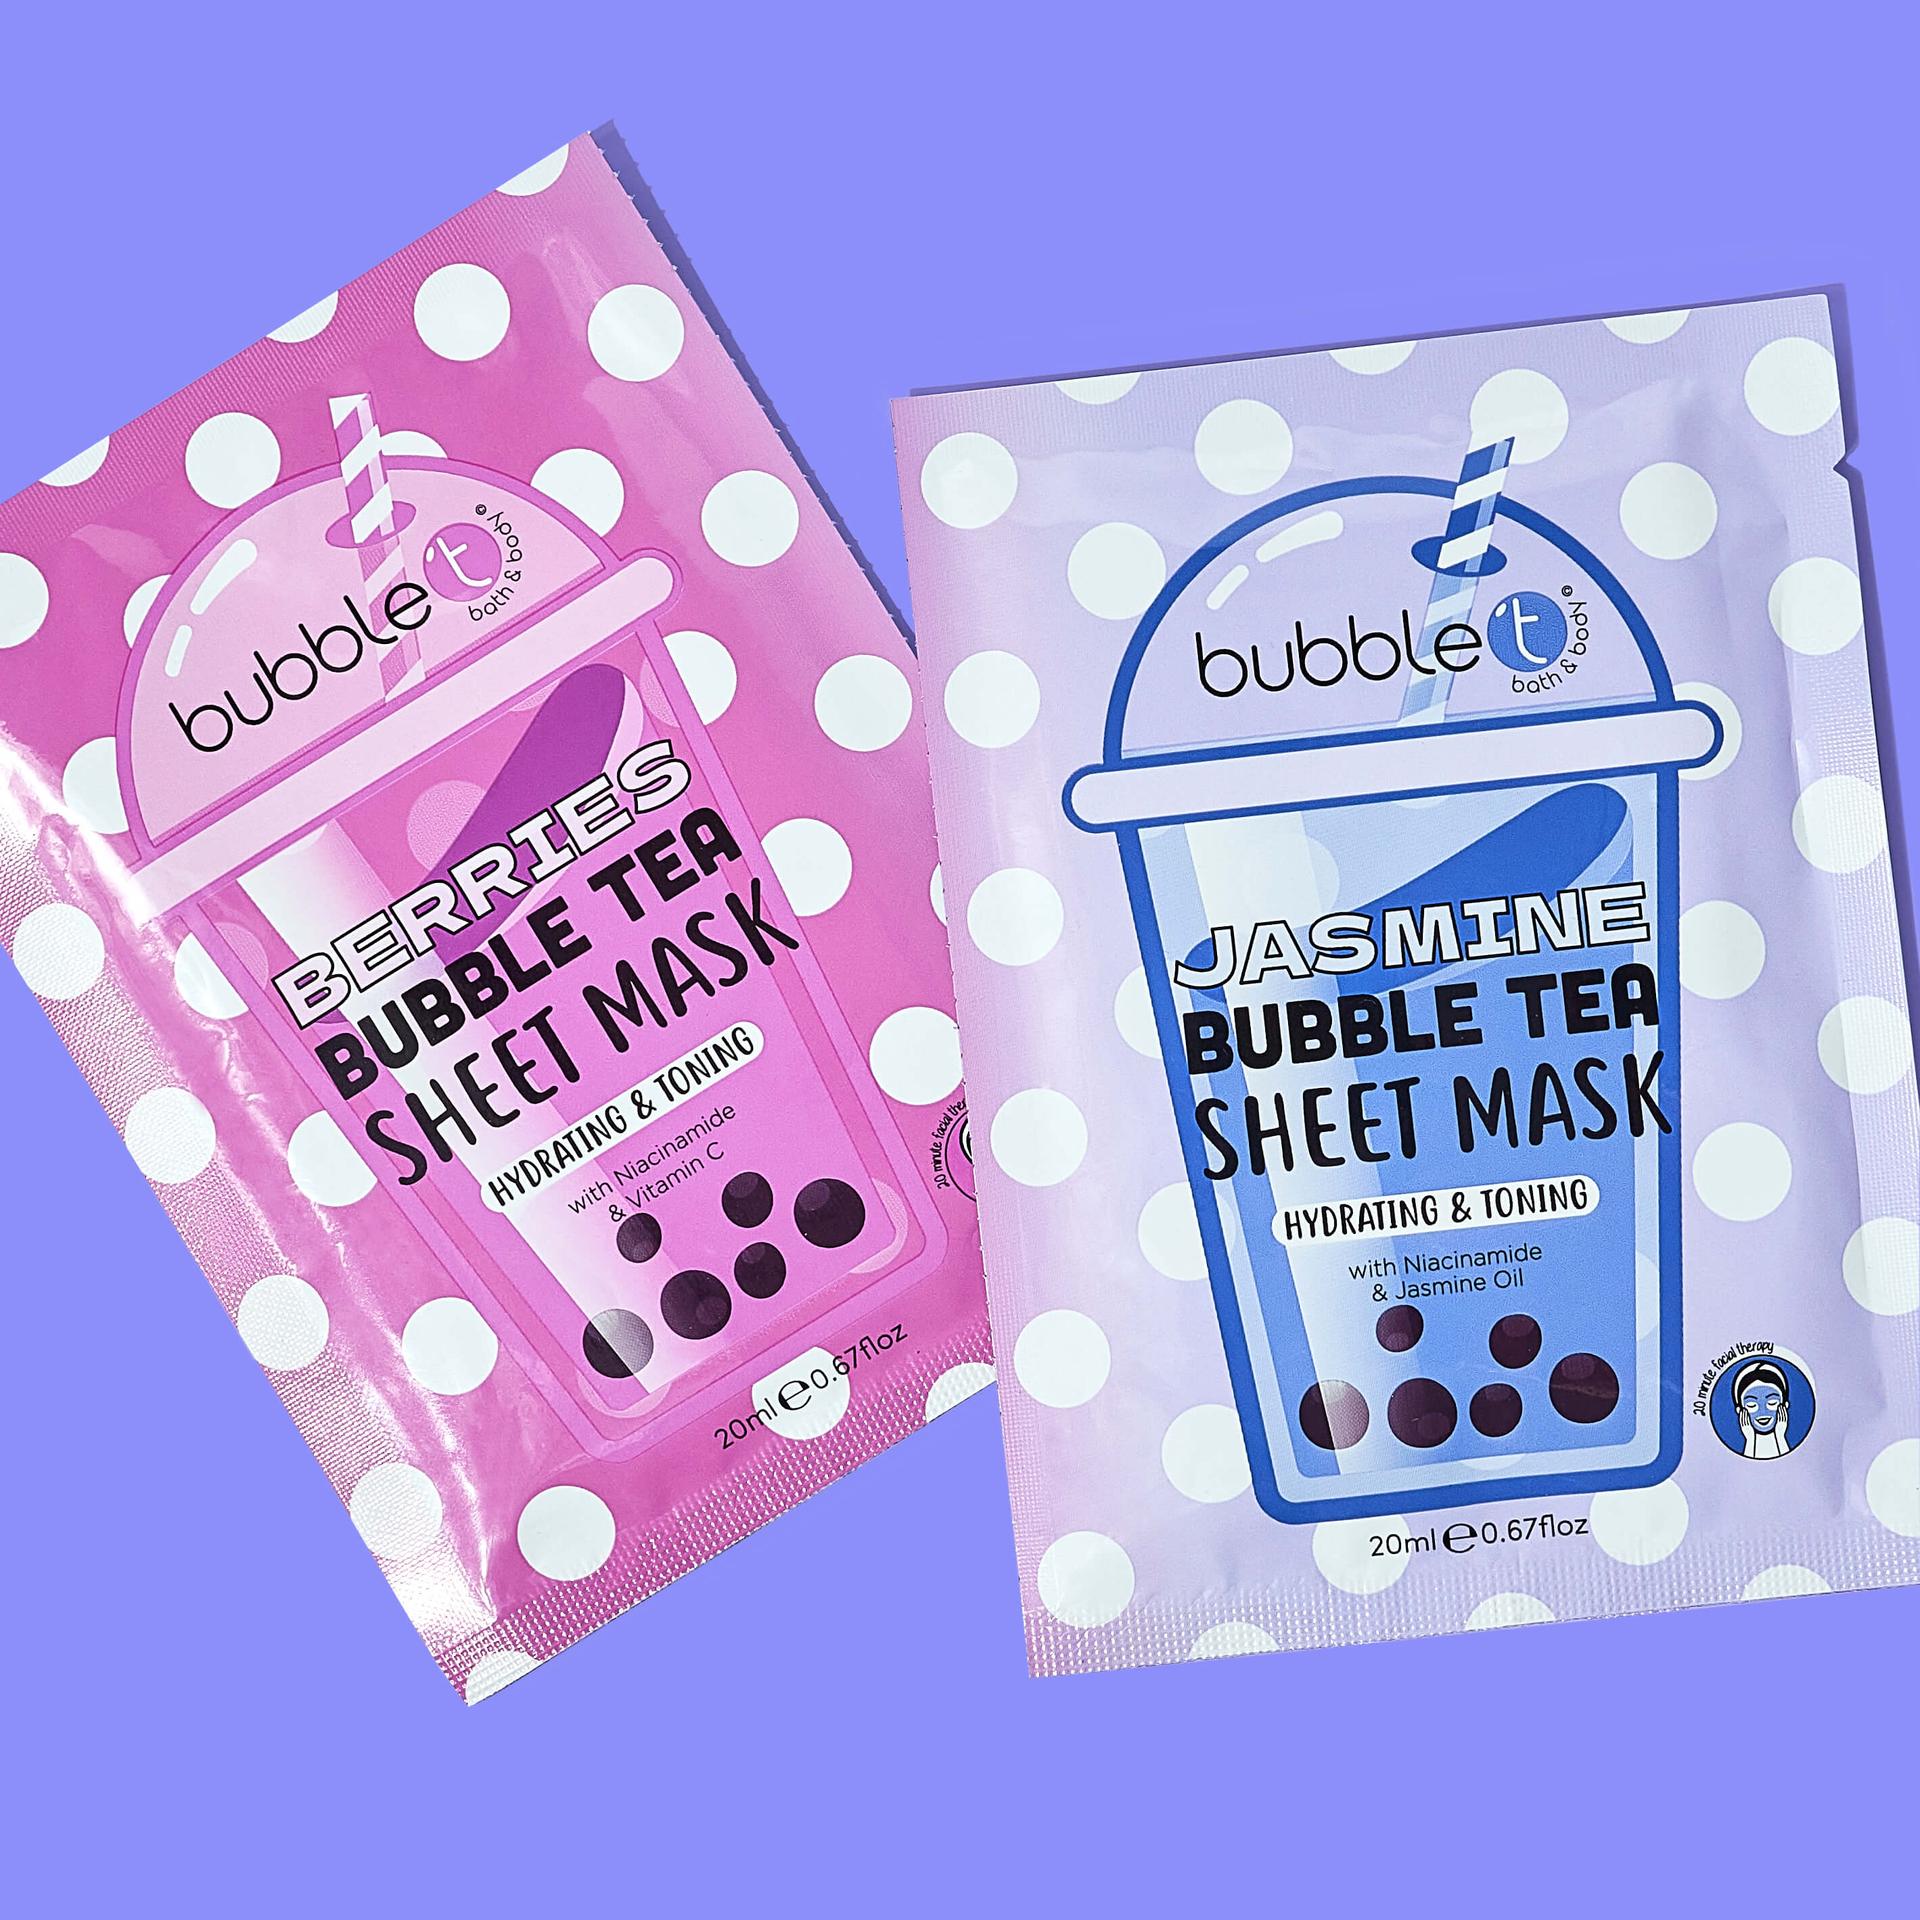 BUBBLE T COSMETICS Sheet Mask Duo in Berries and Jasmine